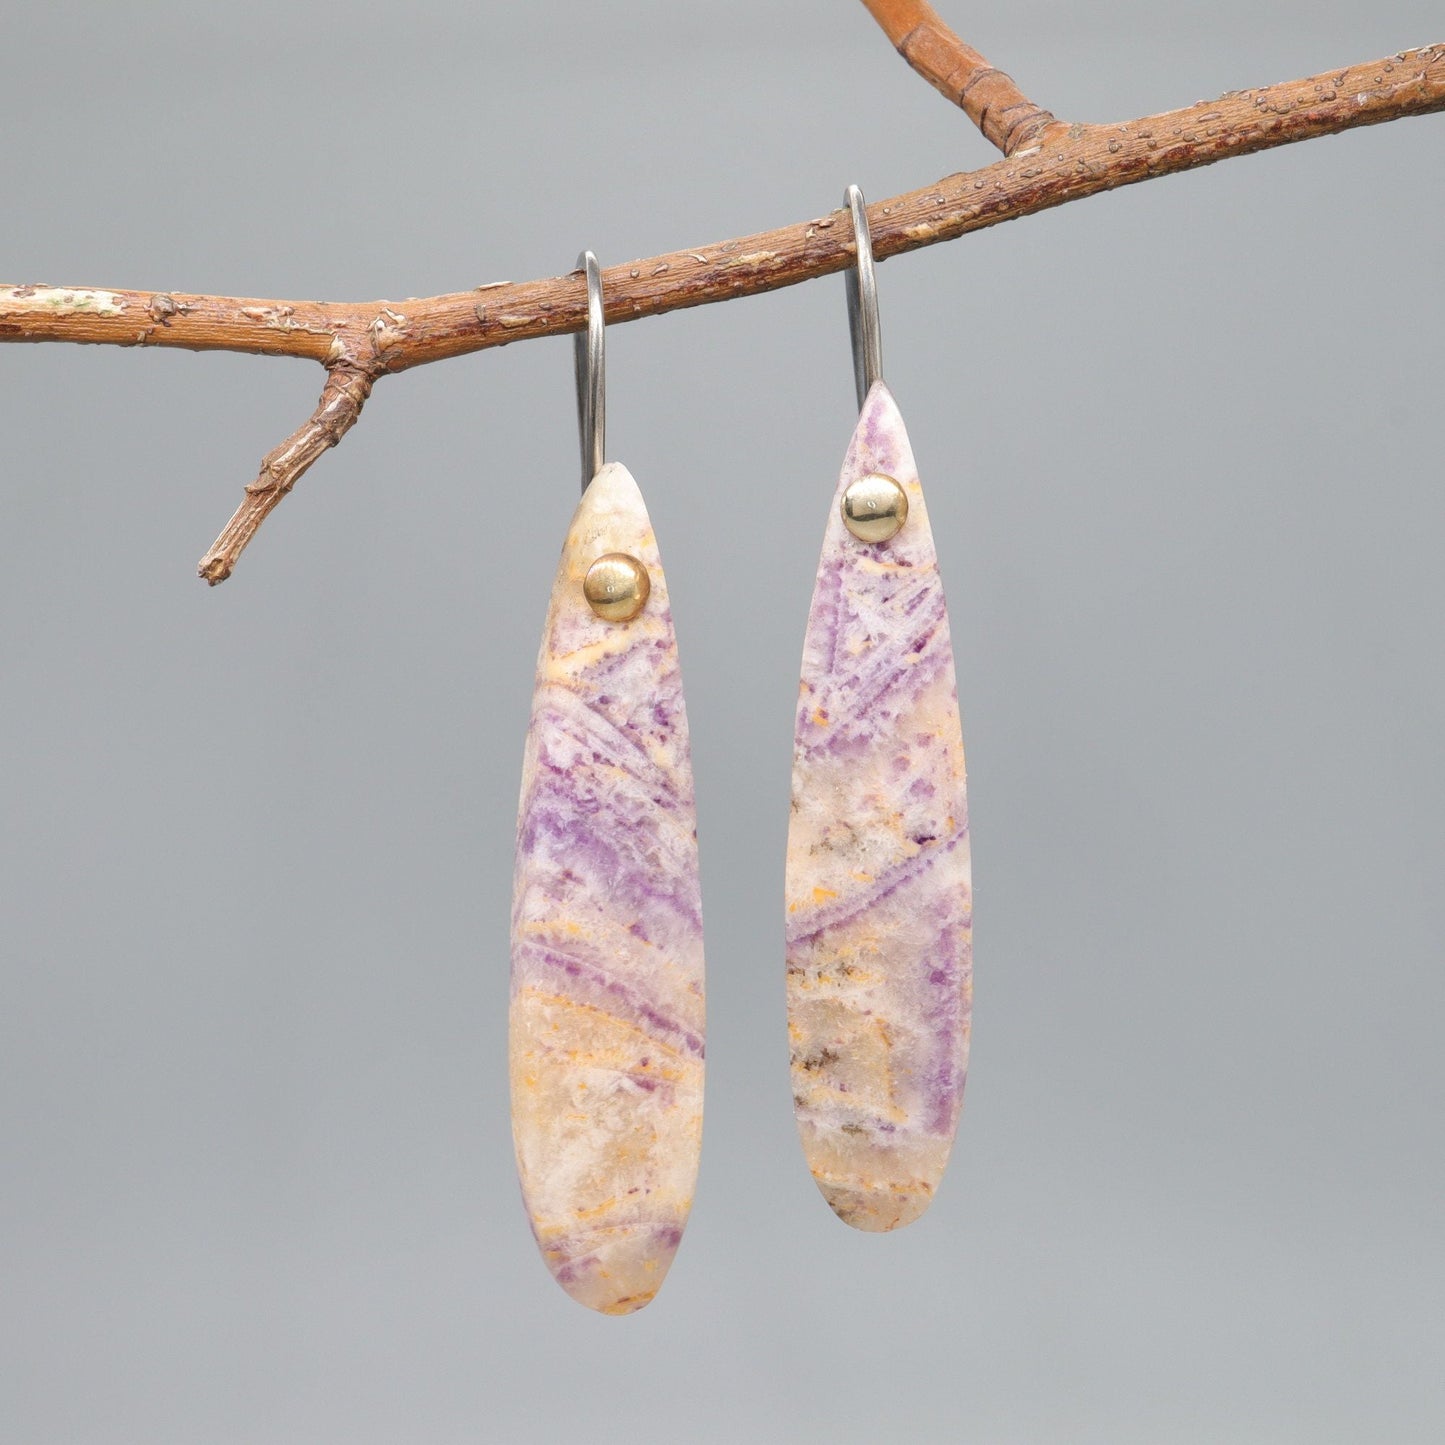 Drop earrings, purple Flourite gemstones with antique dark silver and gold fittings - Gretna Green Wedding Rings